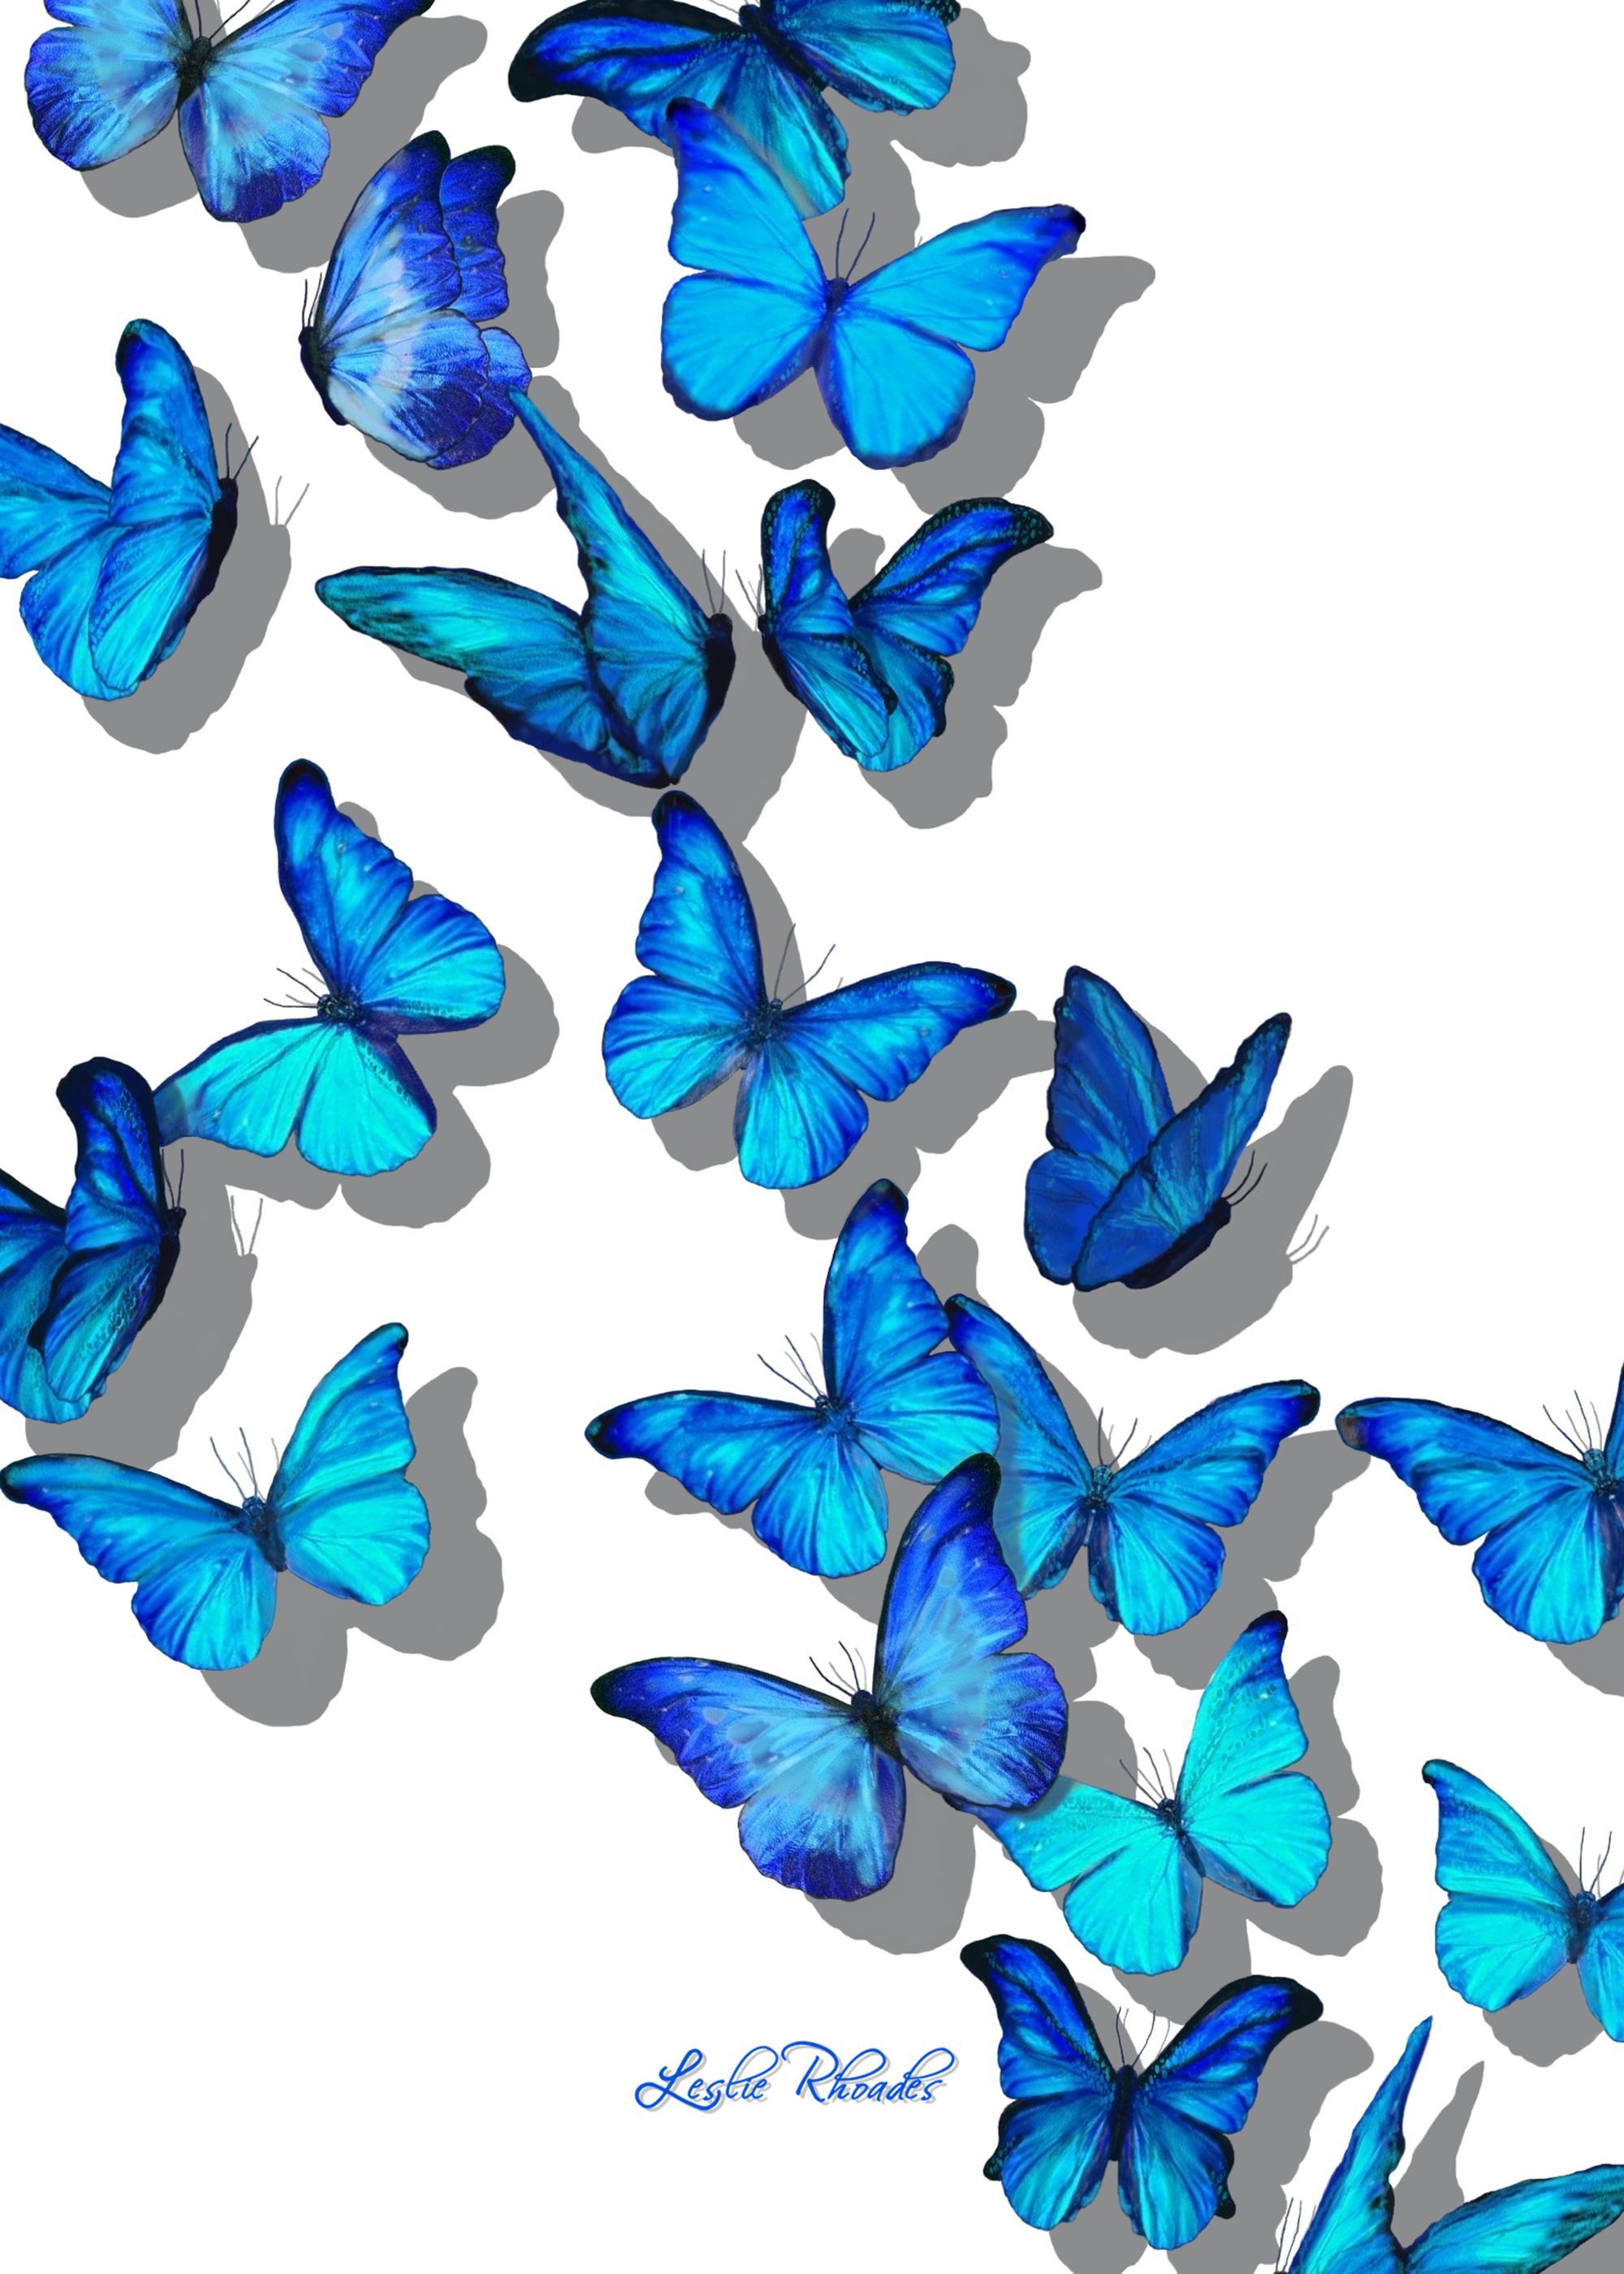 25 Excellent blue butterfly wallpaper aesthetic laptop You Can Use It ...